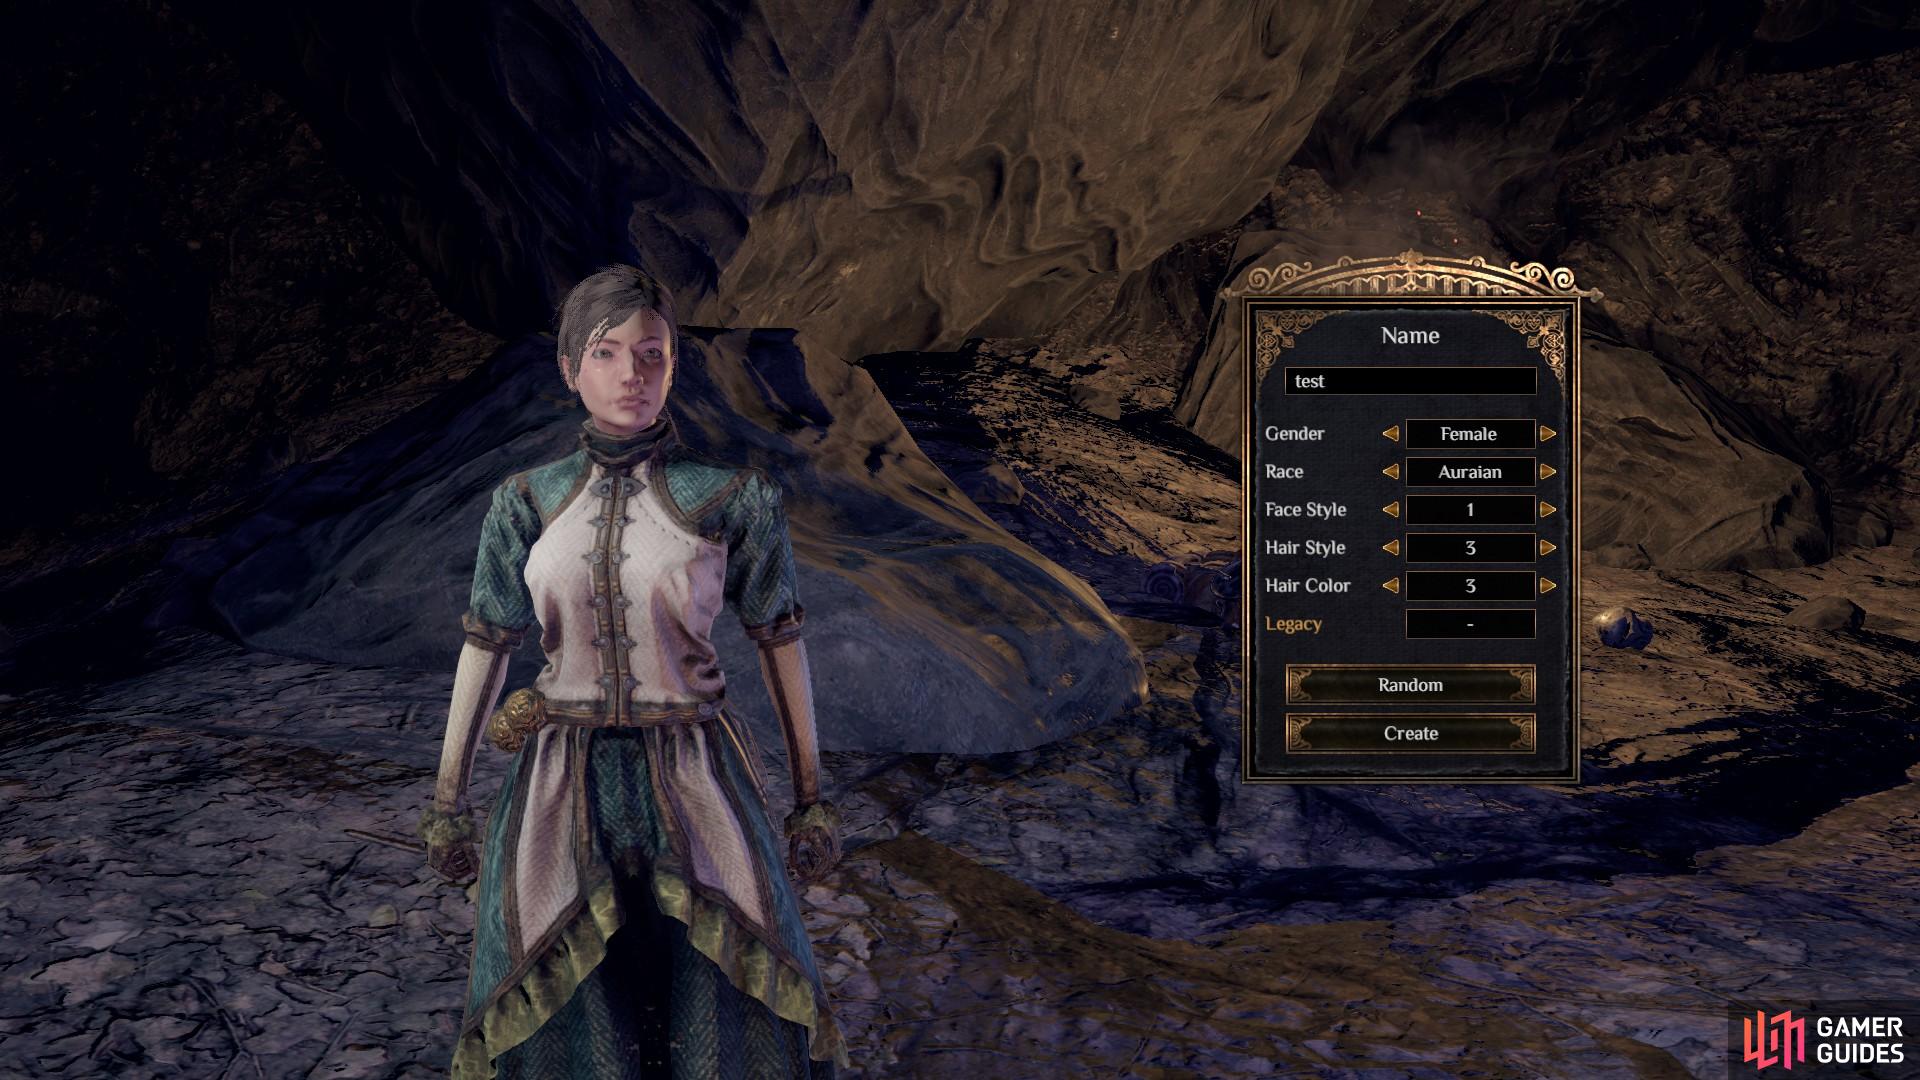 At the character creation screen, select 'Legacy' to choose which character to inherit from.